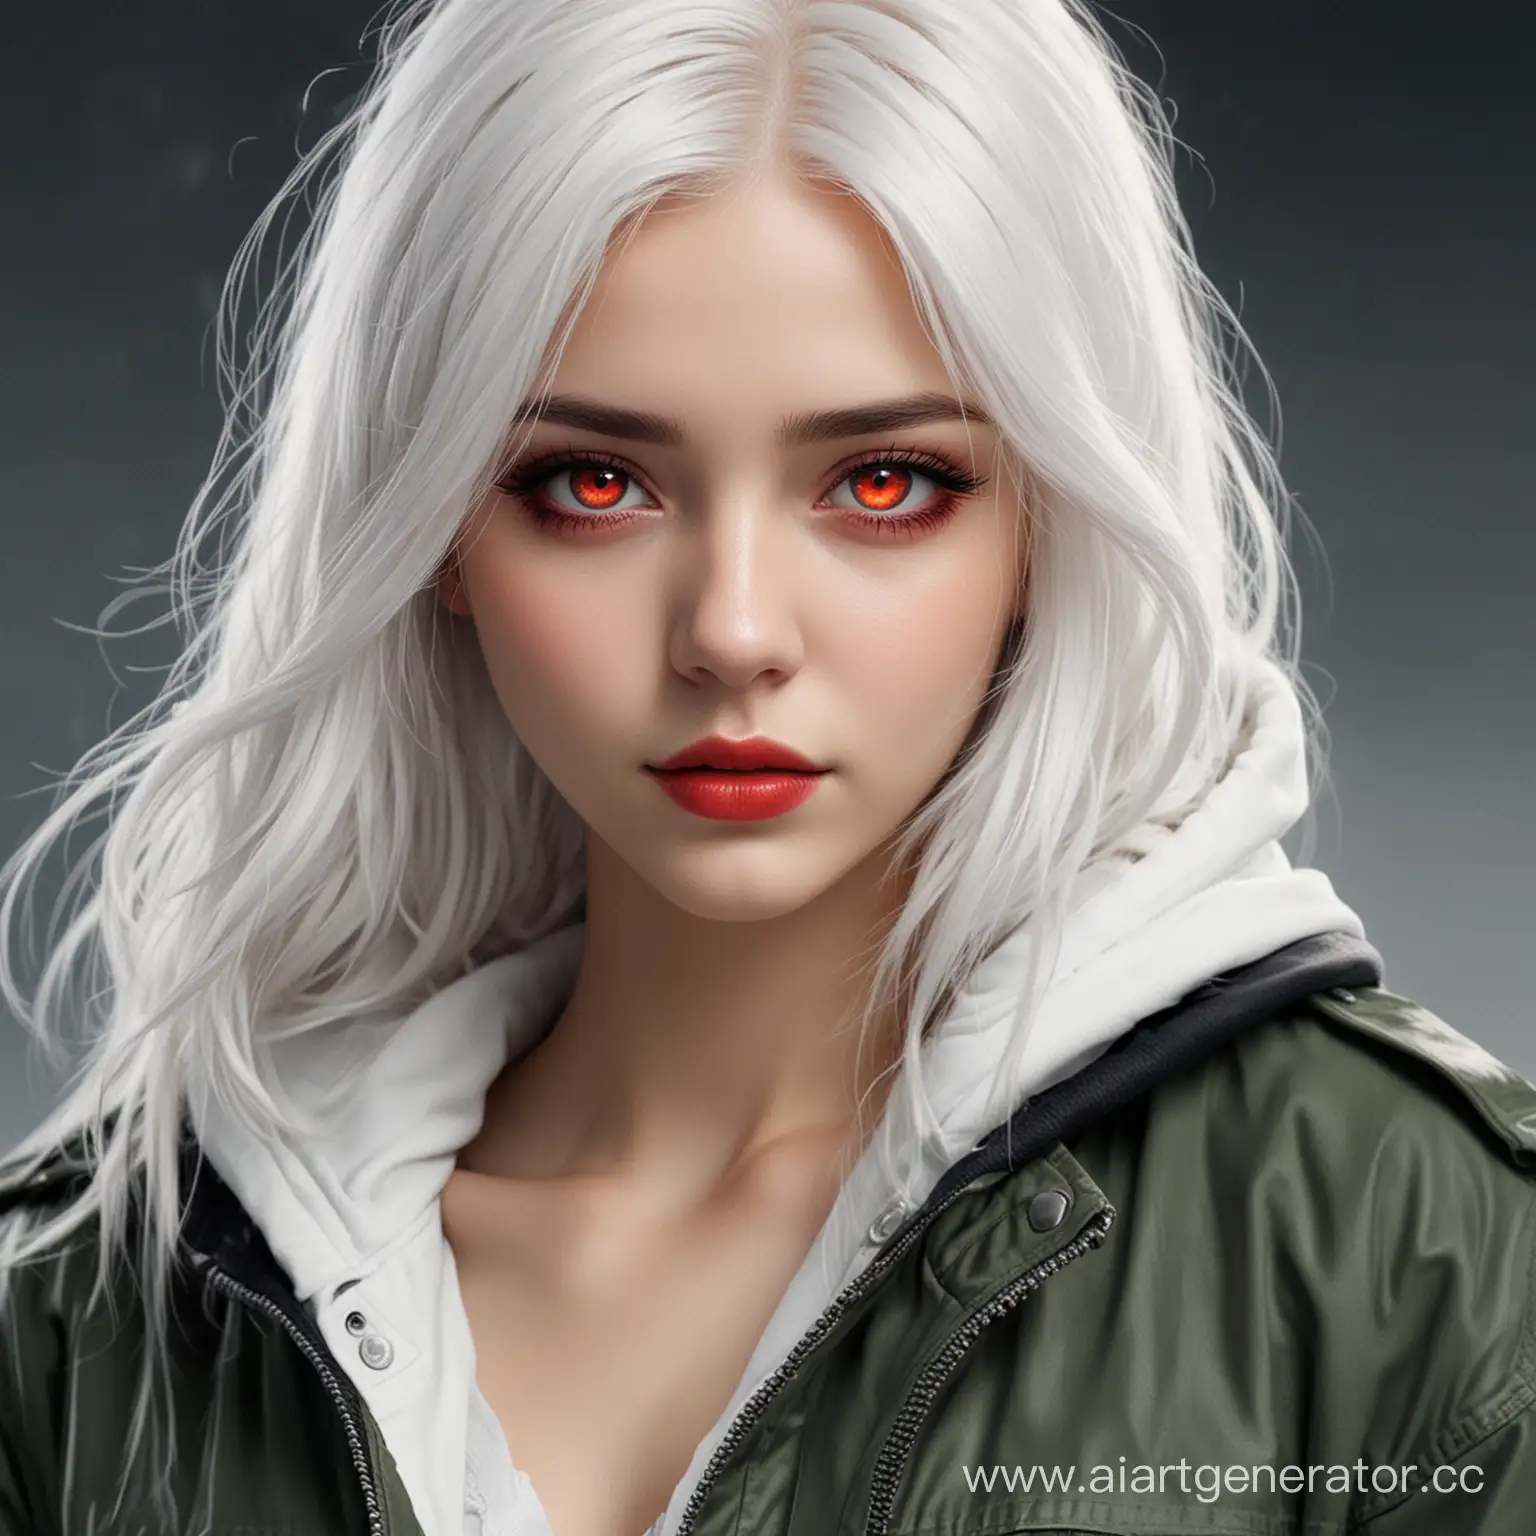 Mysterious-Girl-with-Red-Eyes-and-White-Hair-in-a-Jacket